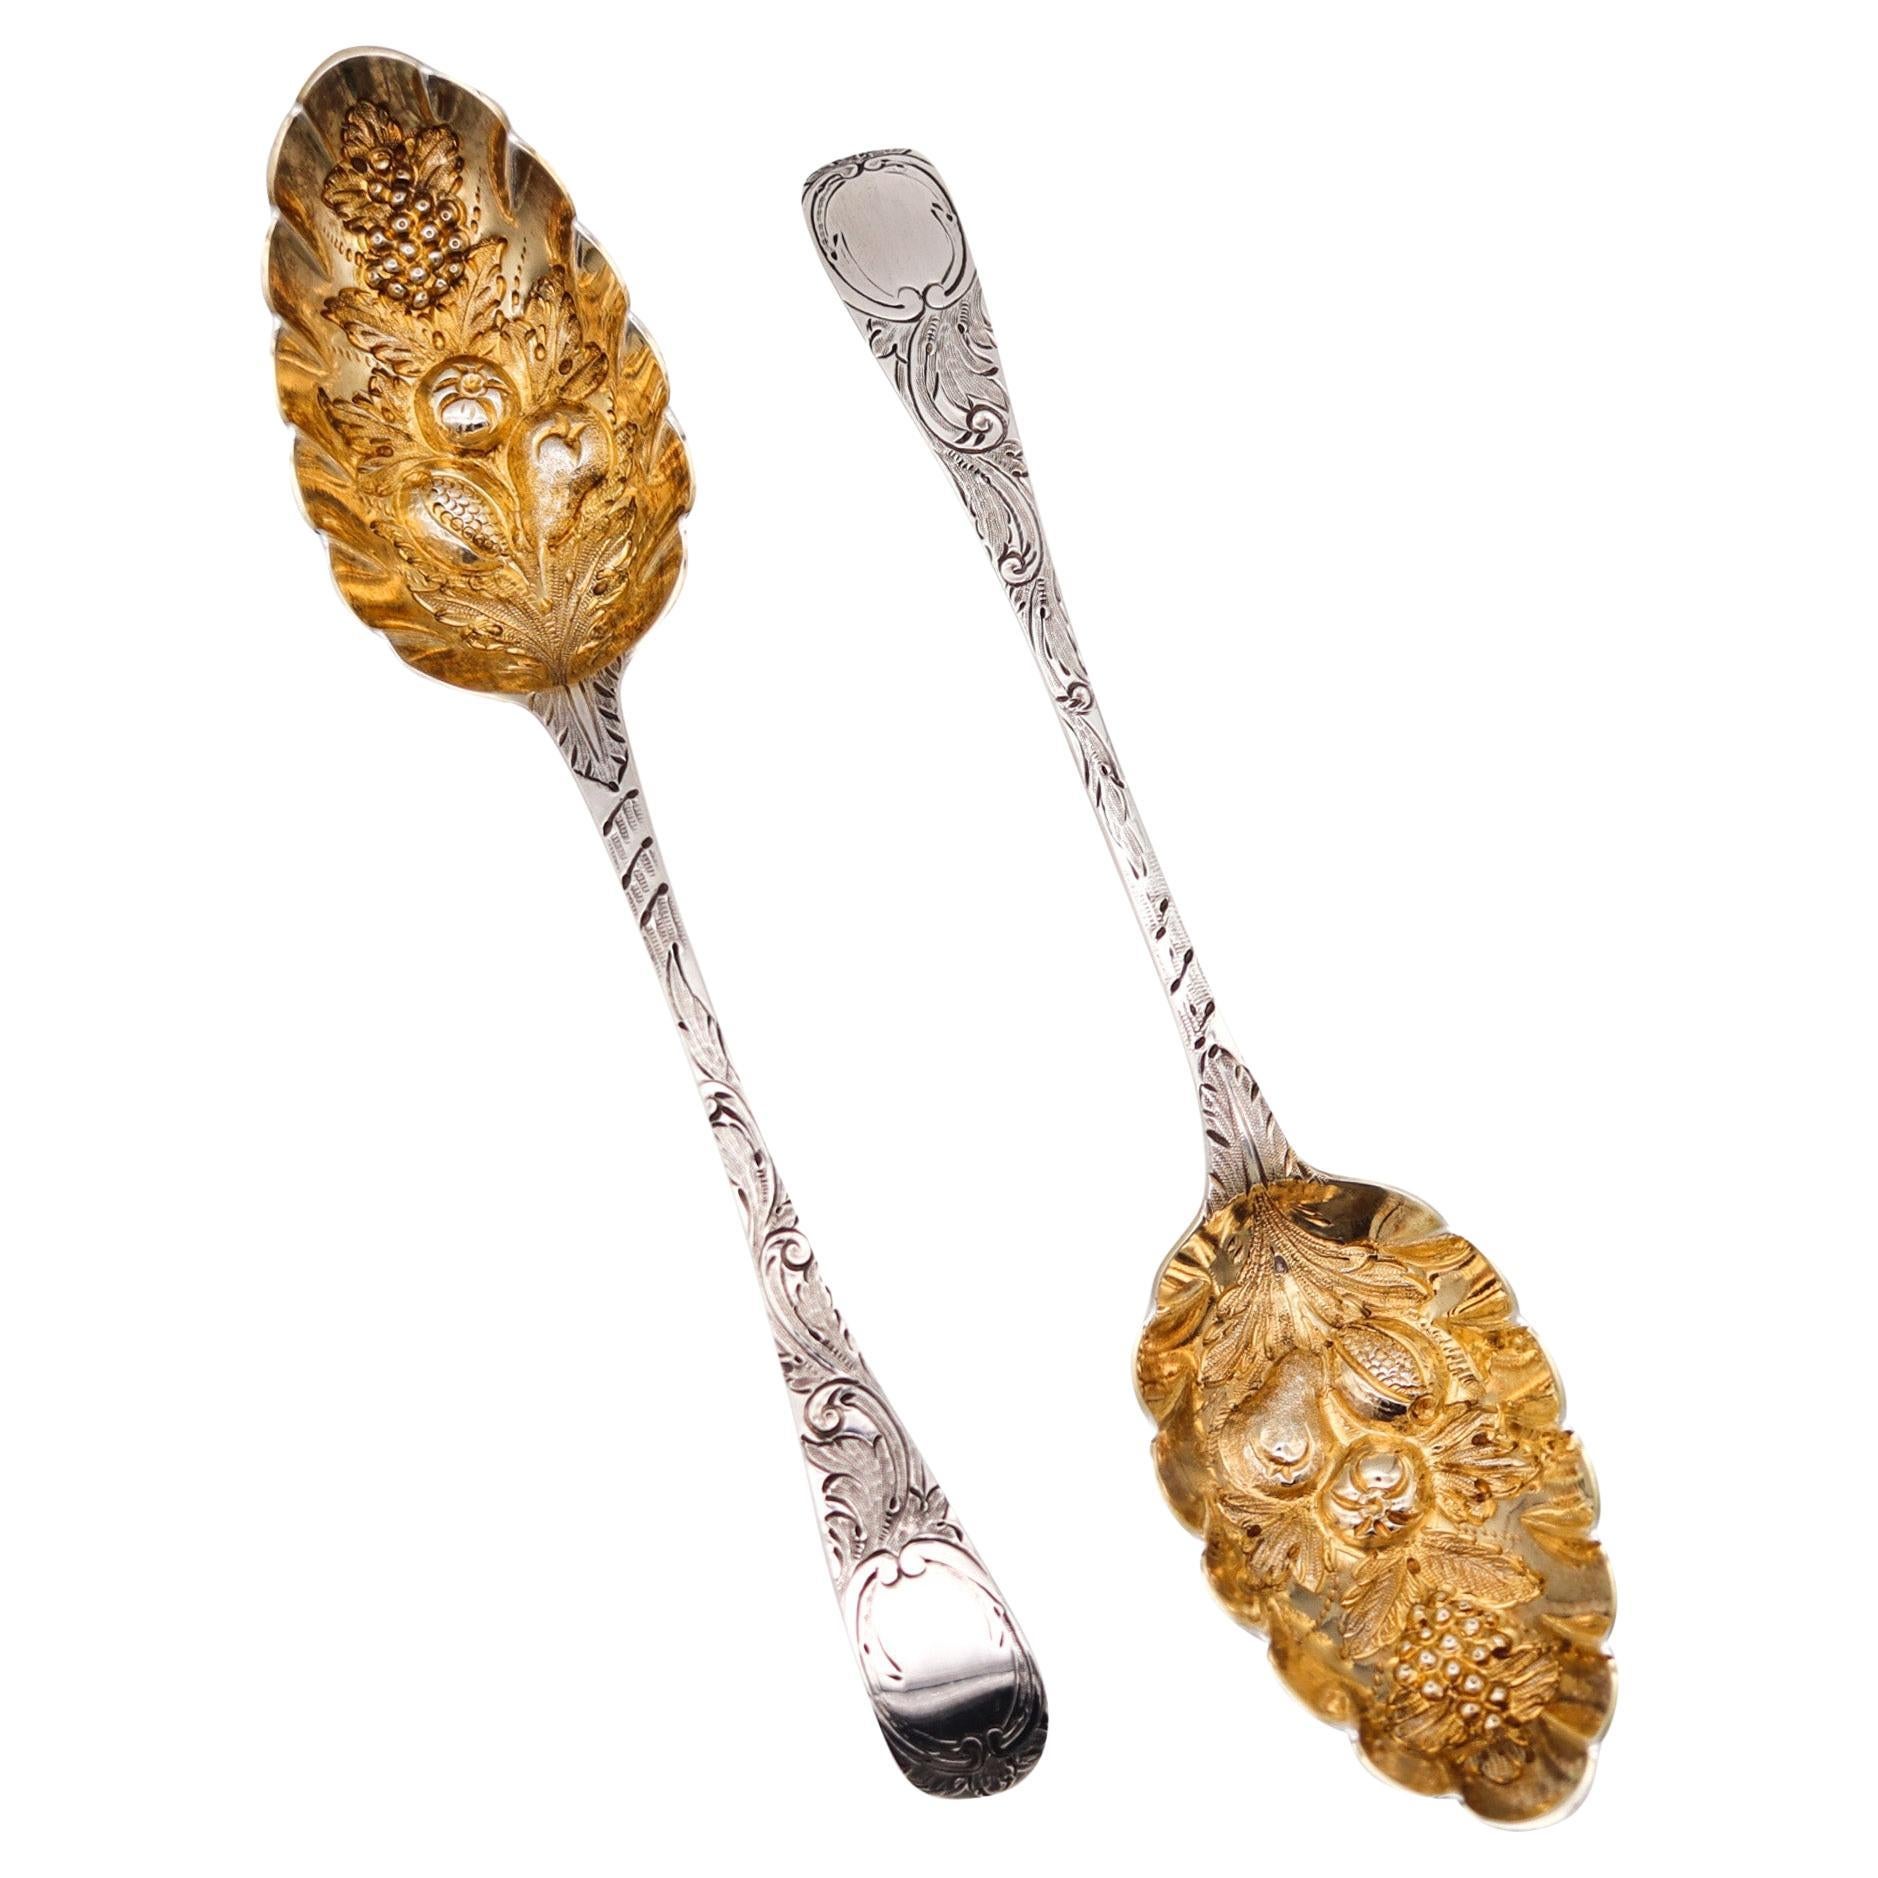 Thomas Barker 1825 London Georgian Pair of Fruit Spoons in Gilded .925 Sterling For Sale